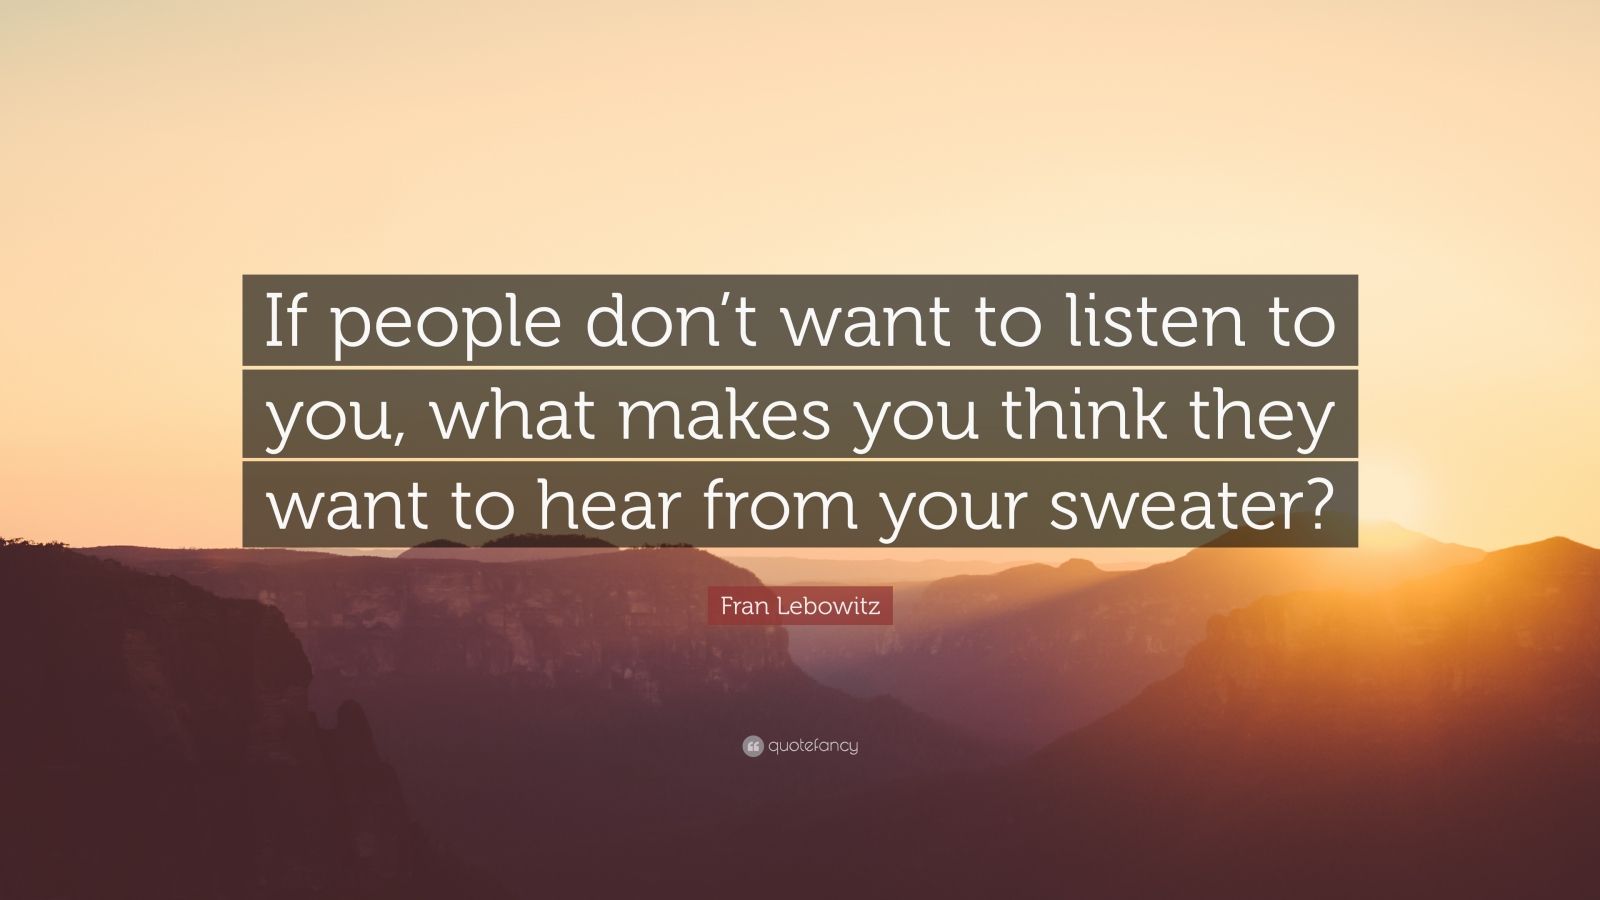 Fran Lebowitz Quote: “If people don’t want to listen to you, what makes ...